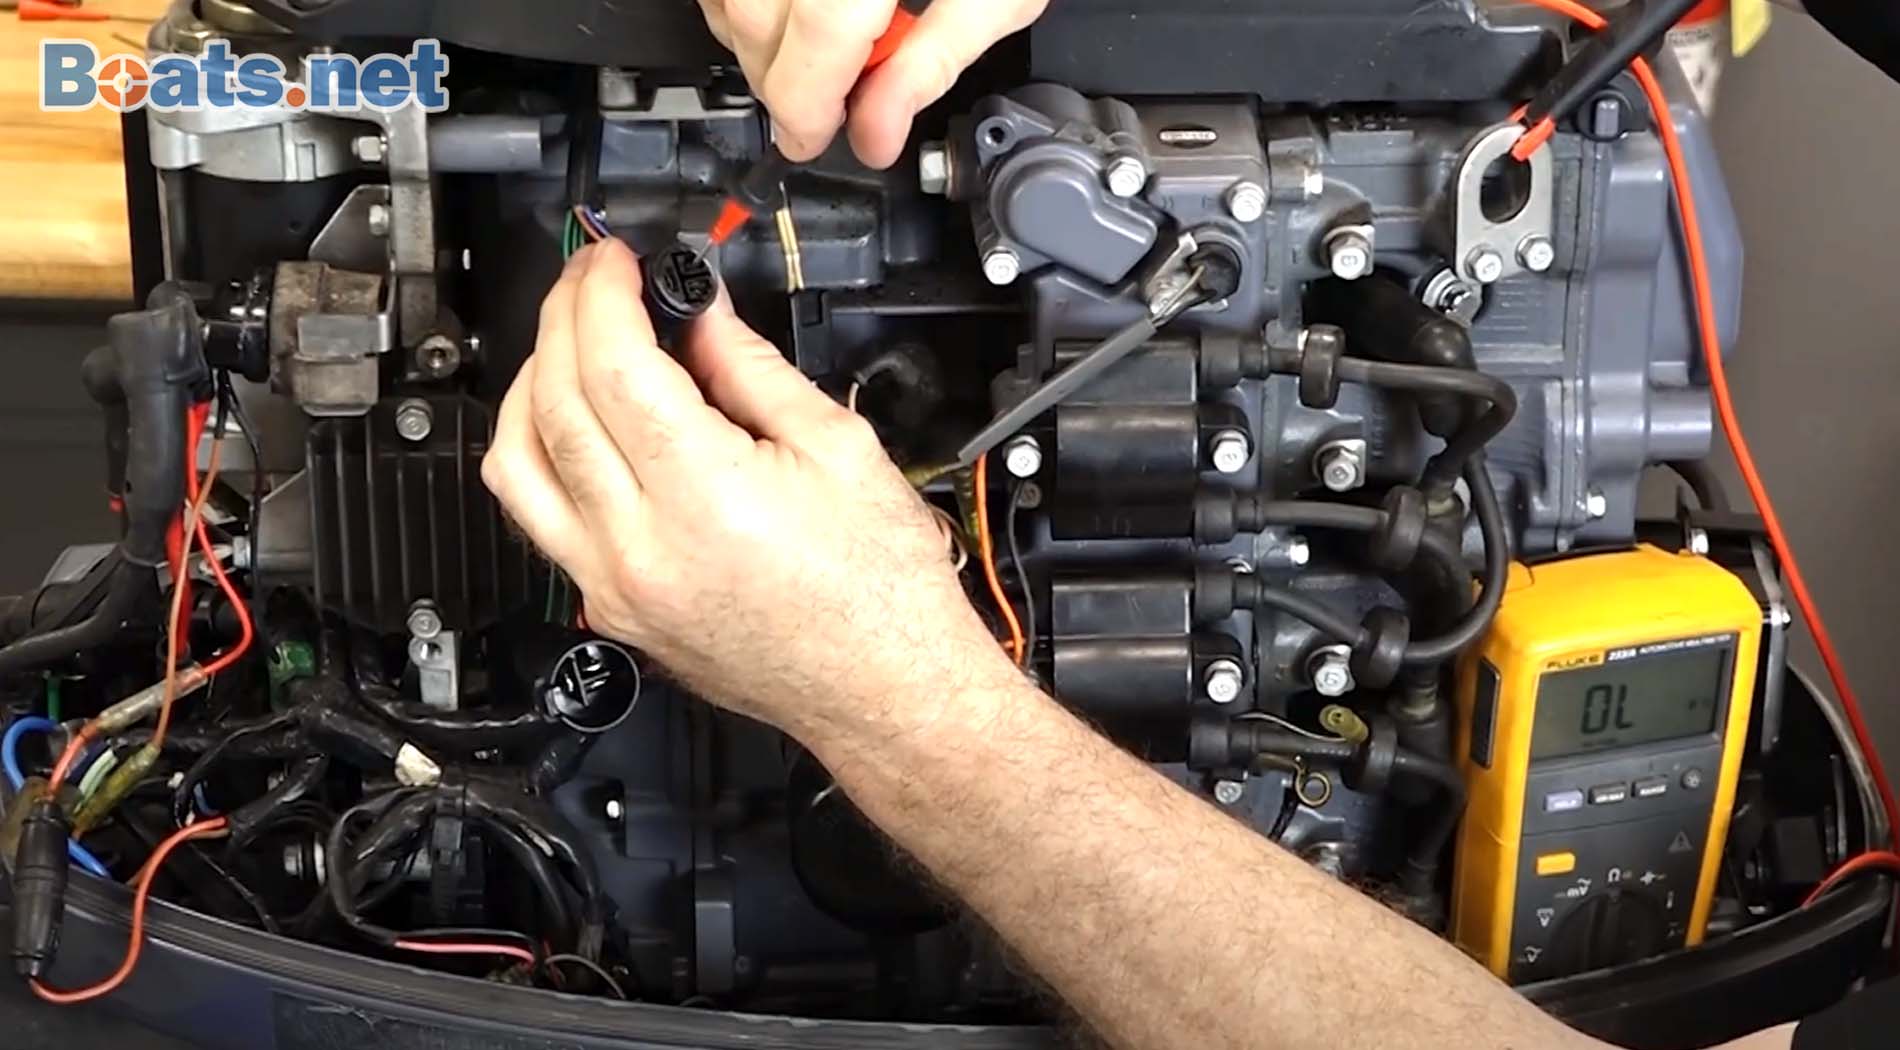 Outboard ignition system troubleshooting stator test